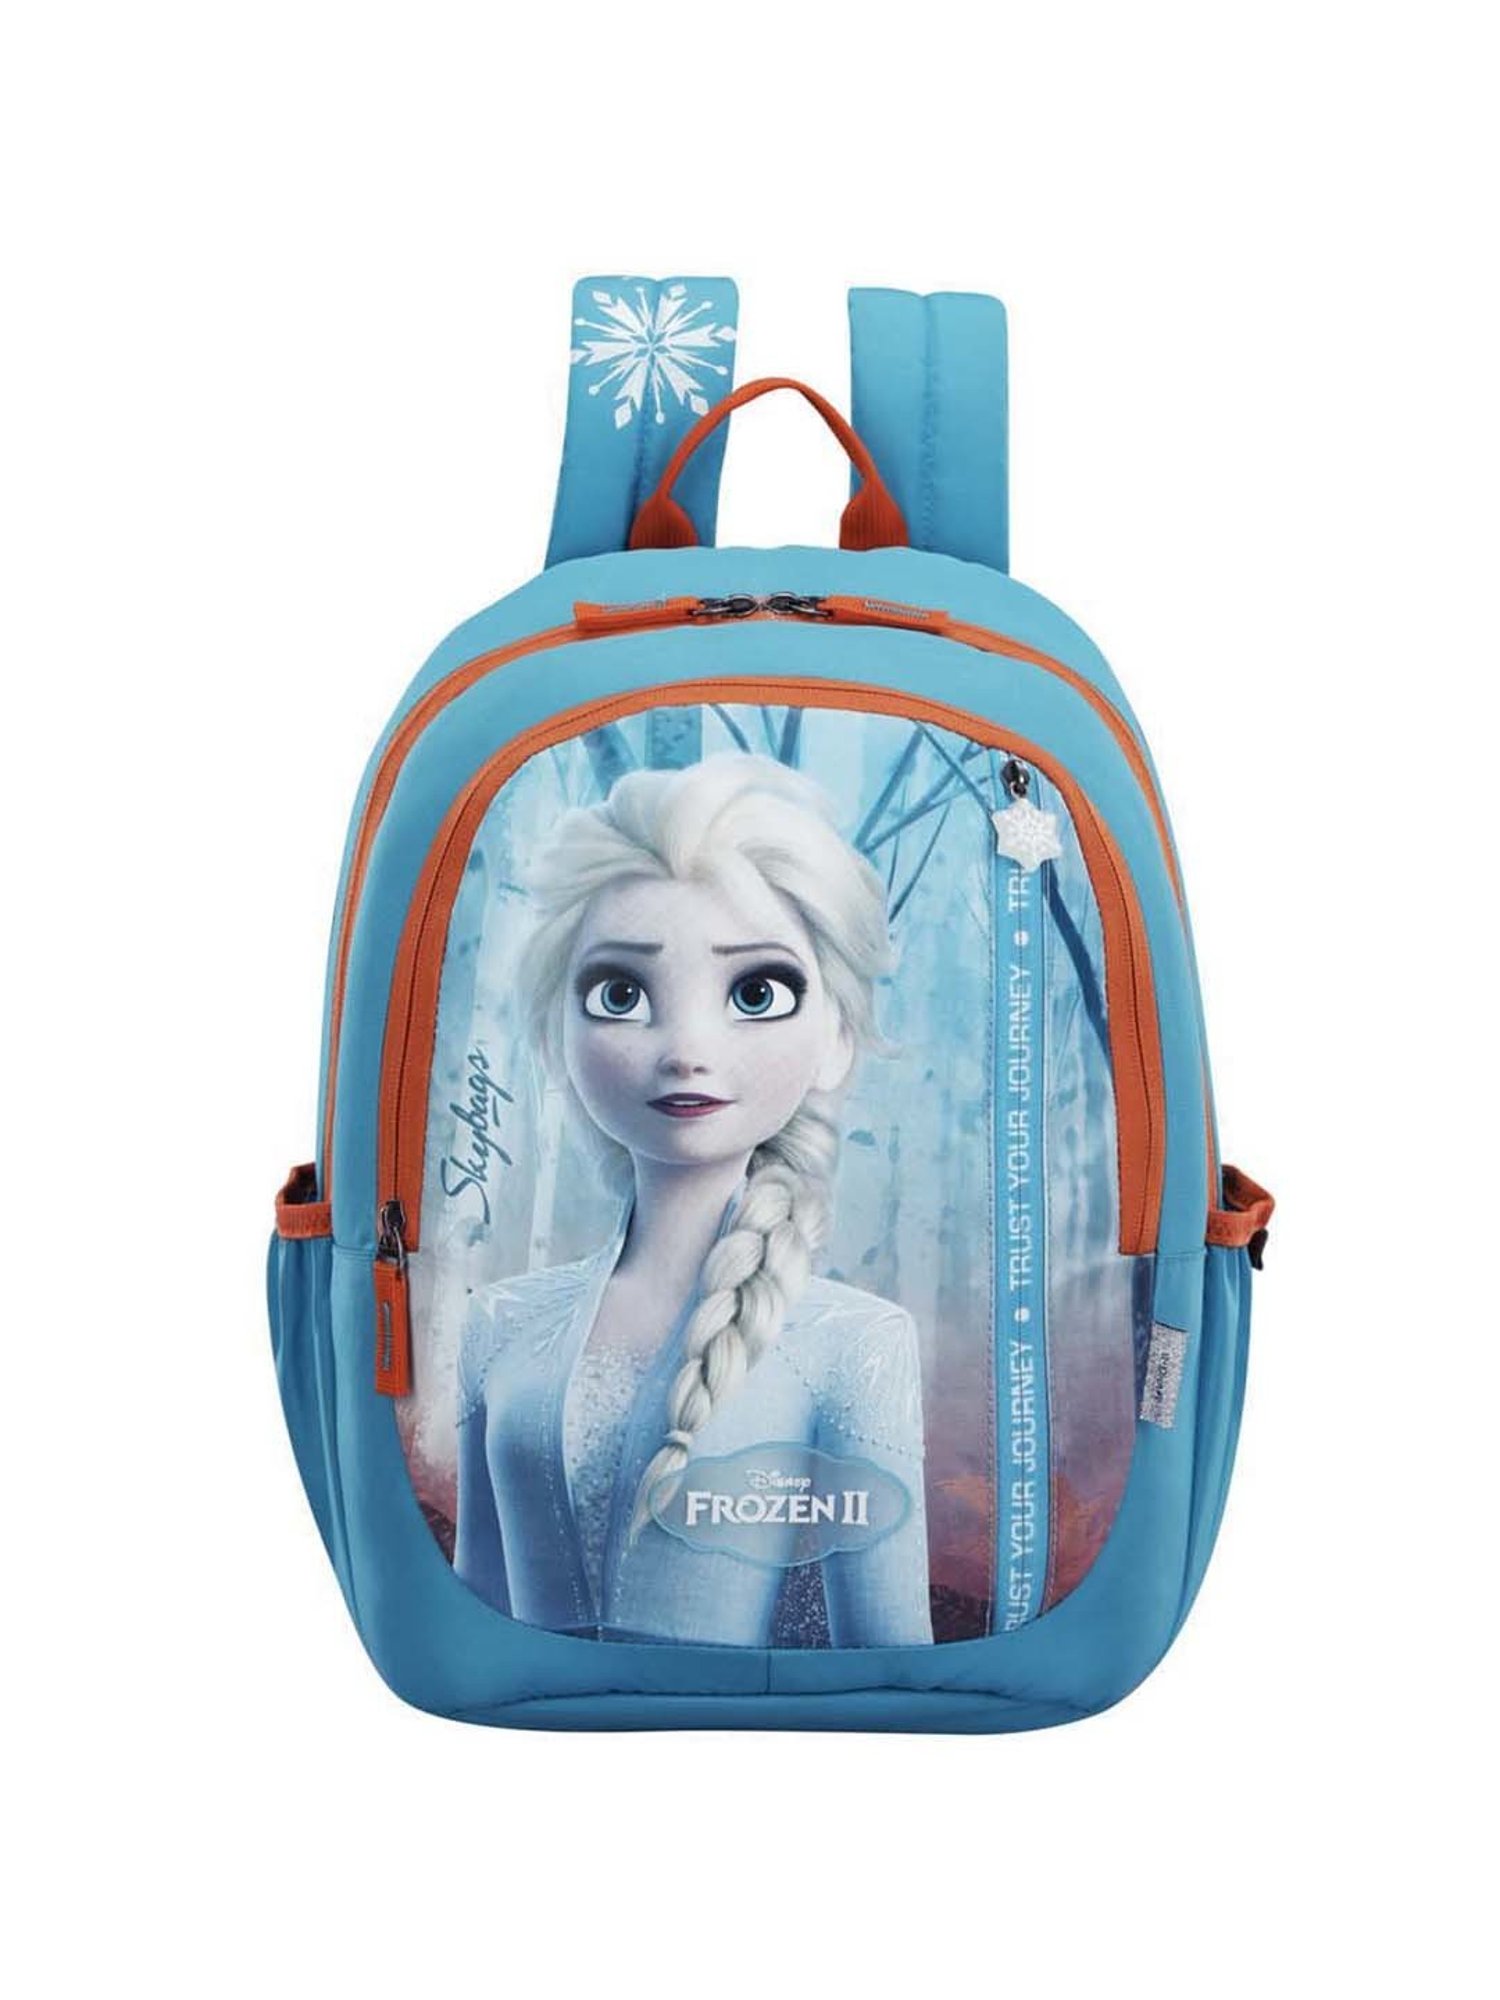 Buy ADSON Kid's Trolley 360 Rotating Carry On Luggage Wheels Non-Breakable  Frozen Elsa Anna 16 Inch Kids Rolling Suitcase with 4 Wheel Travel Trolley  Bag Case(Frozen Elsa & Anna Sky Blue &